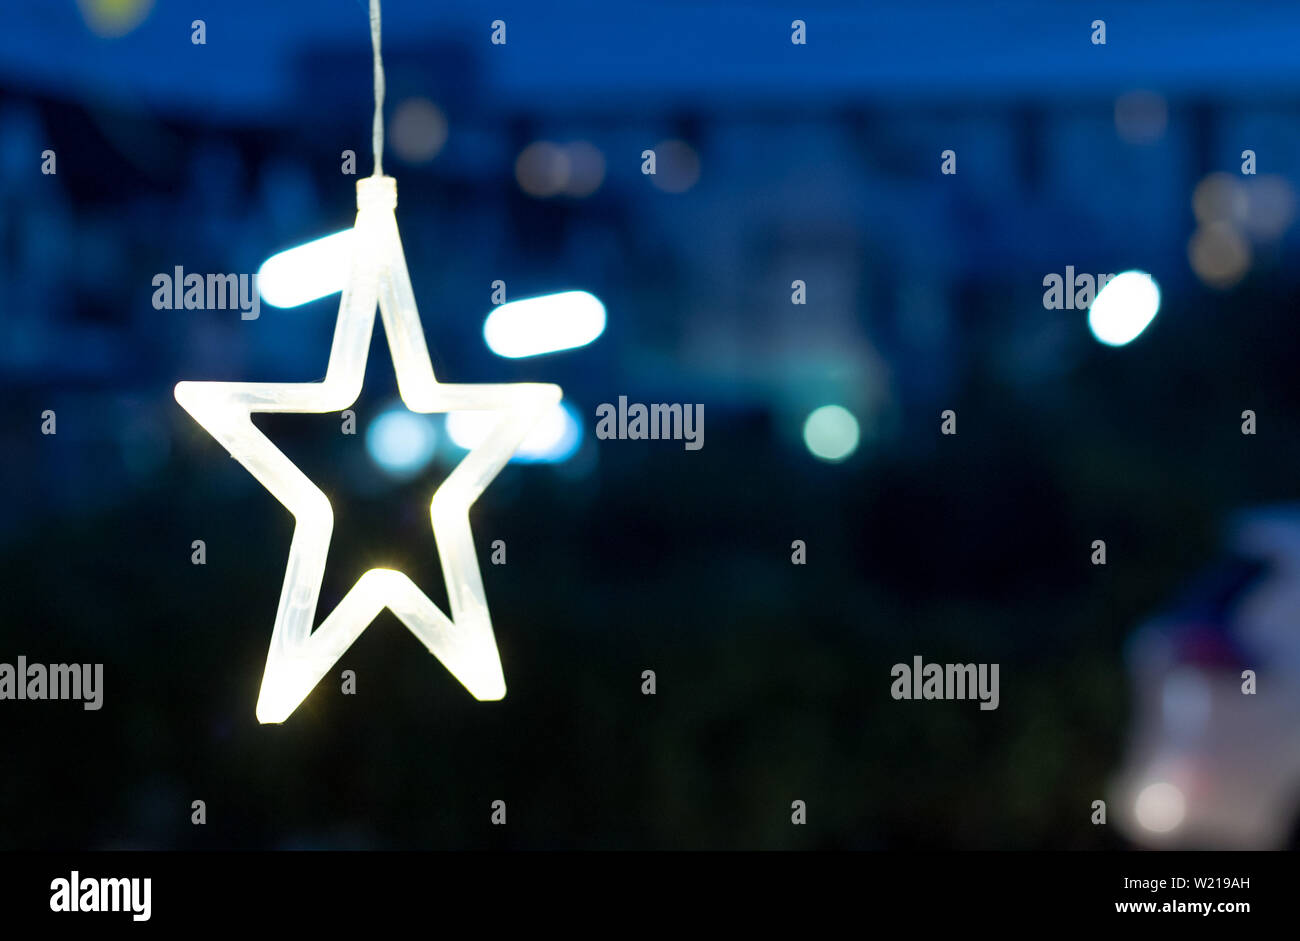 The yellow star-shaped lights for decoration. Stock Photo